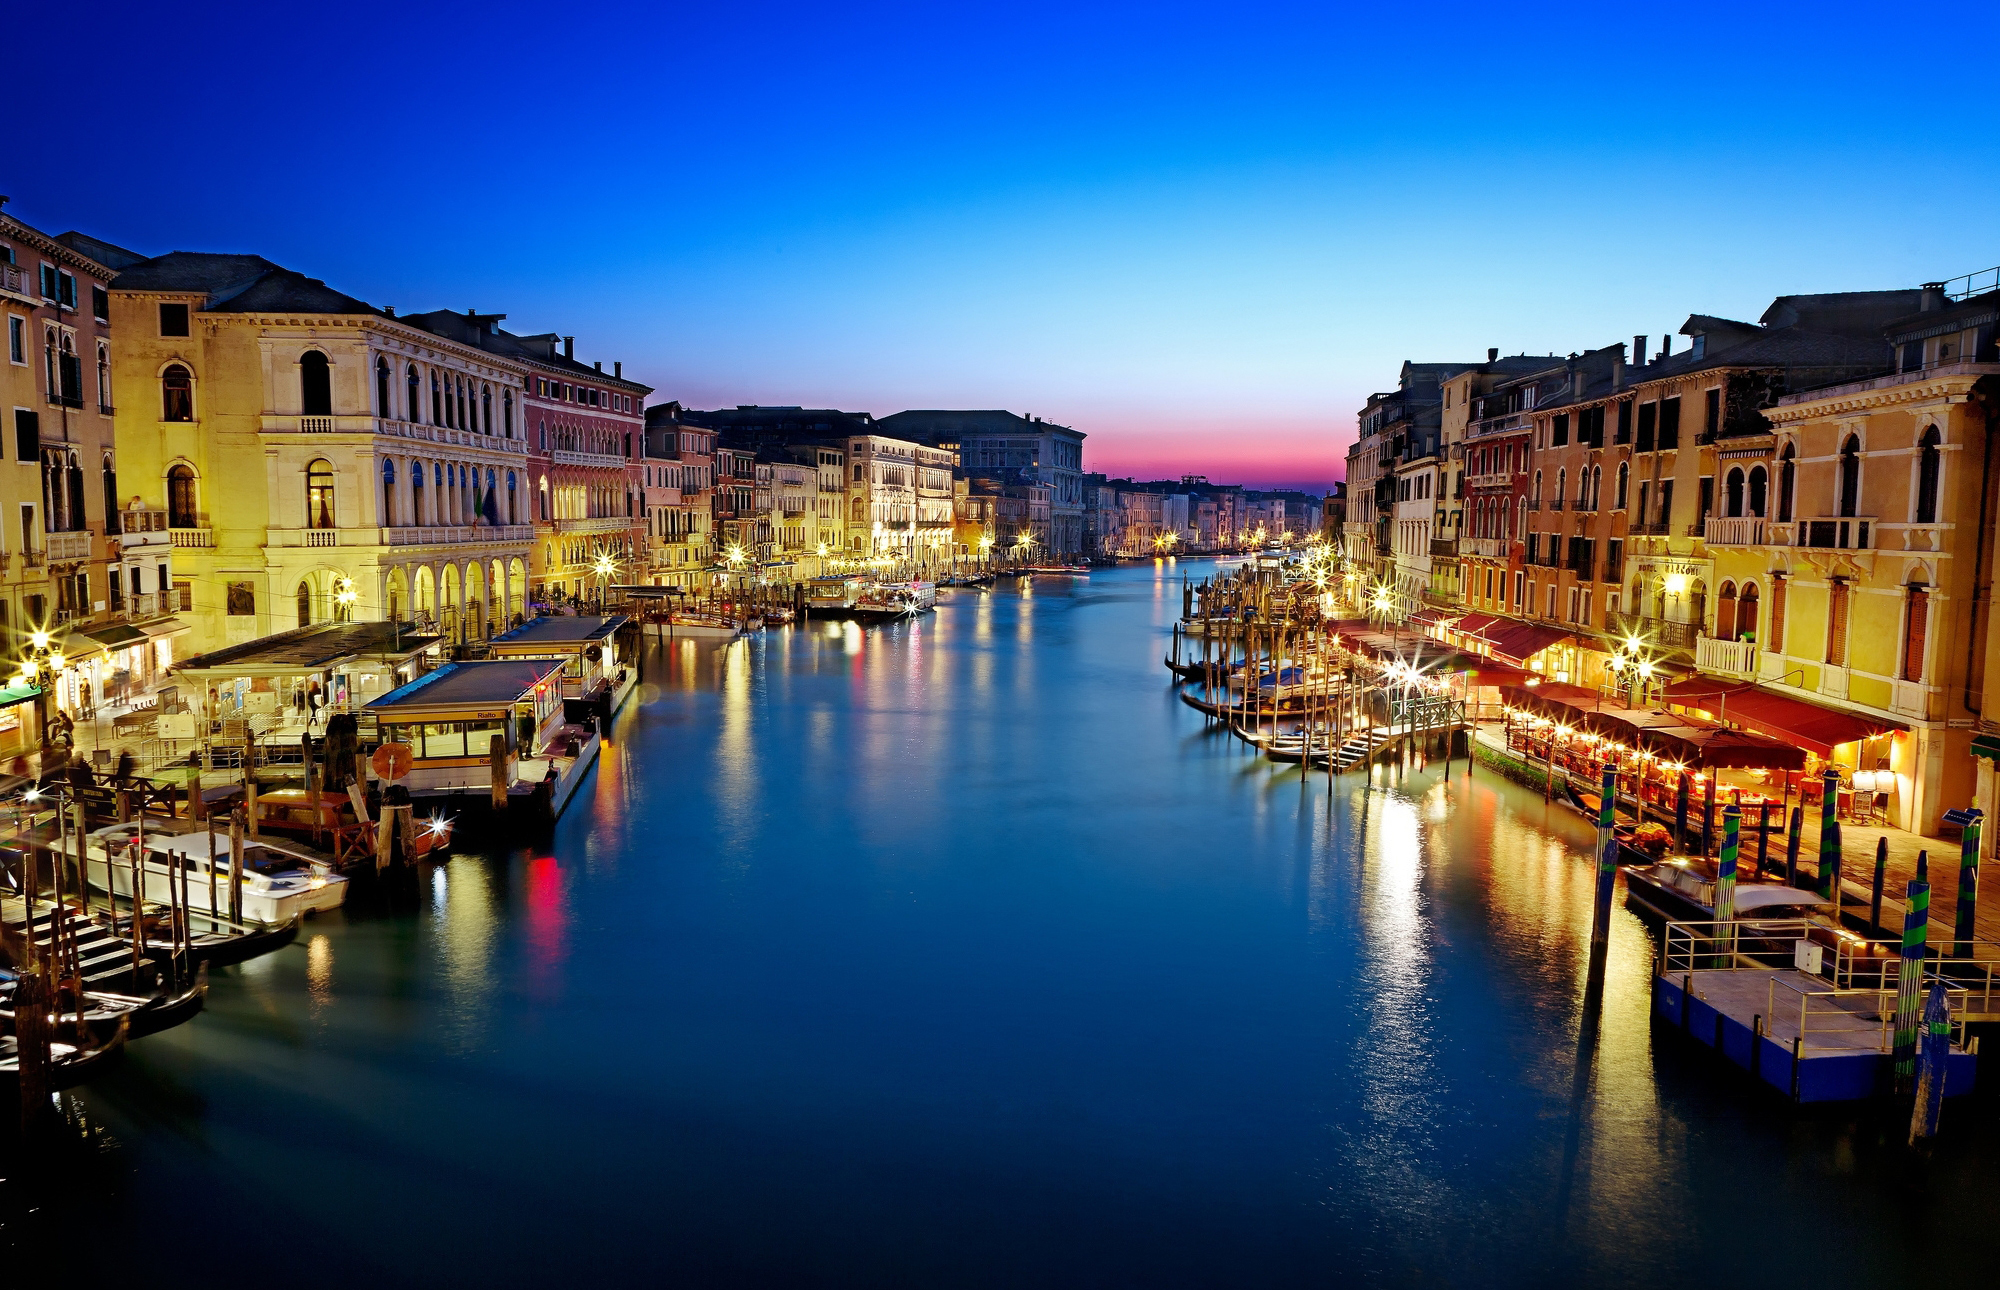 Venice Italy, The Most Romantic City in the World